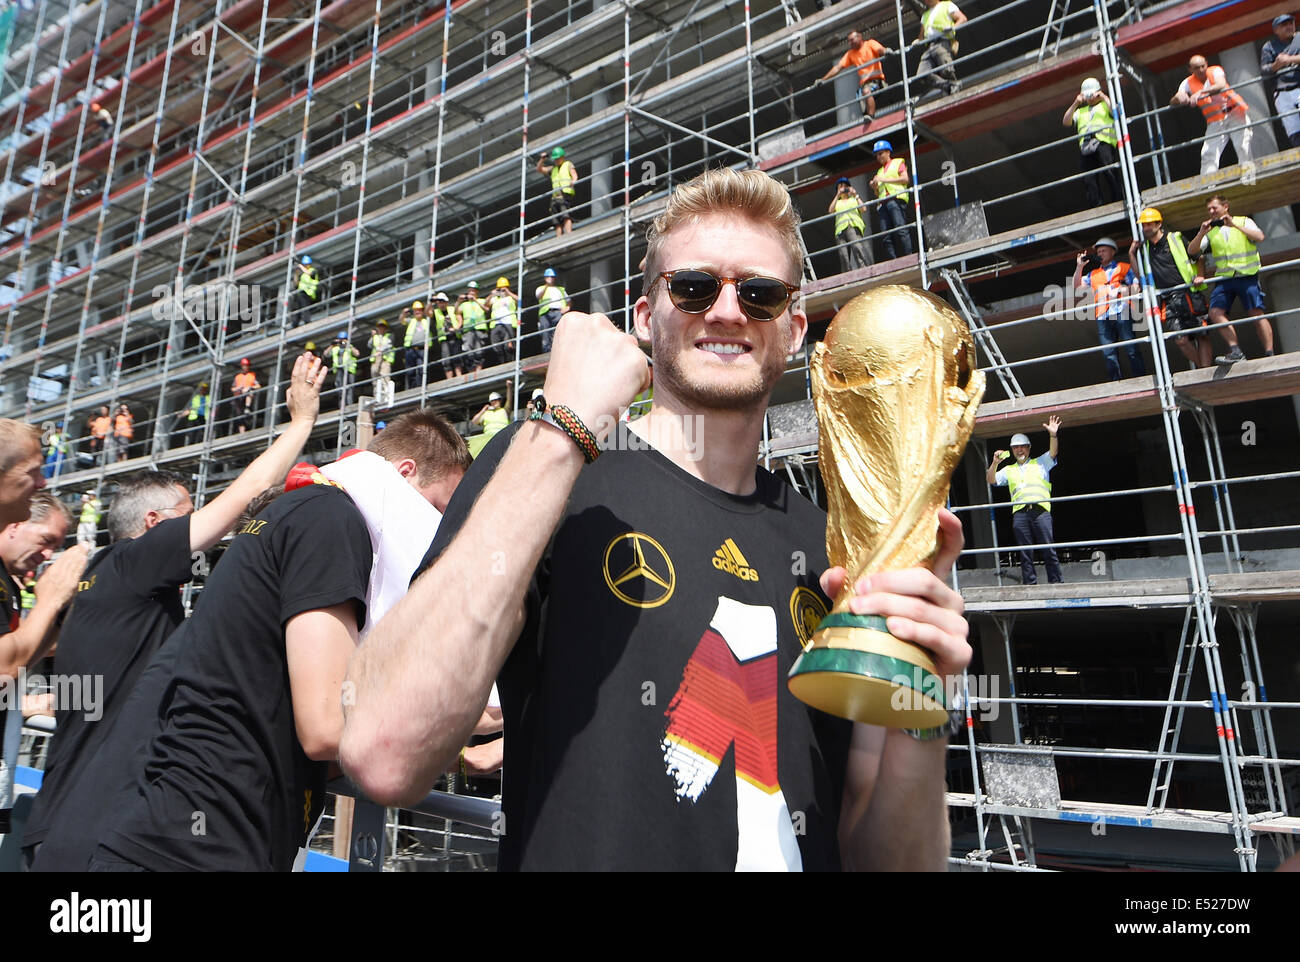 Welcome party of the German Nationalteam, the new Football World Champion, at the Brandenburger Tor in Berlin, Andre Schürrle, Schuerrle. Stock Photo